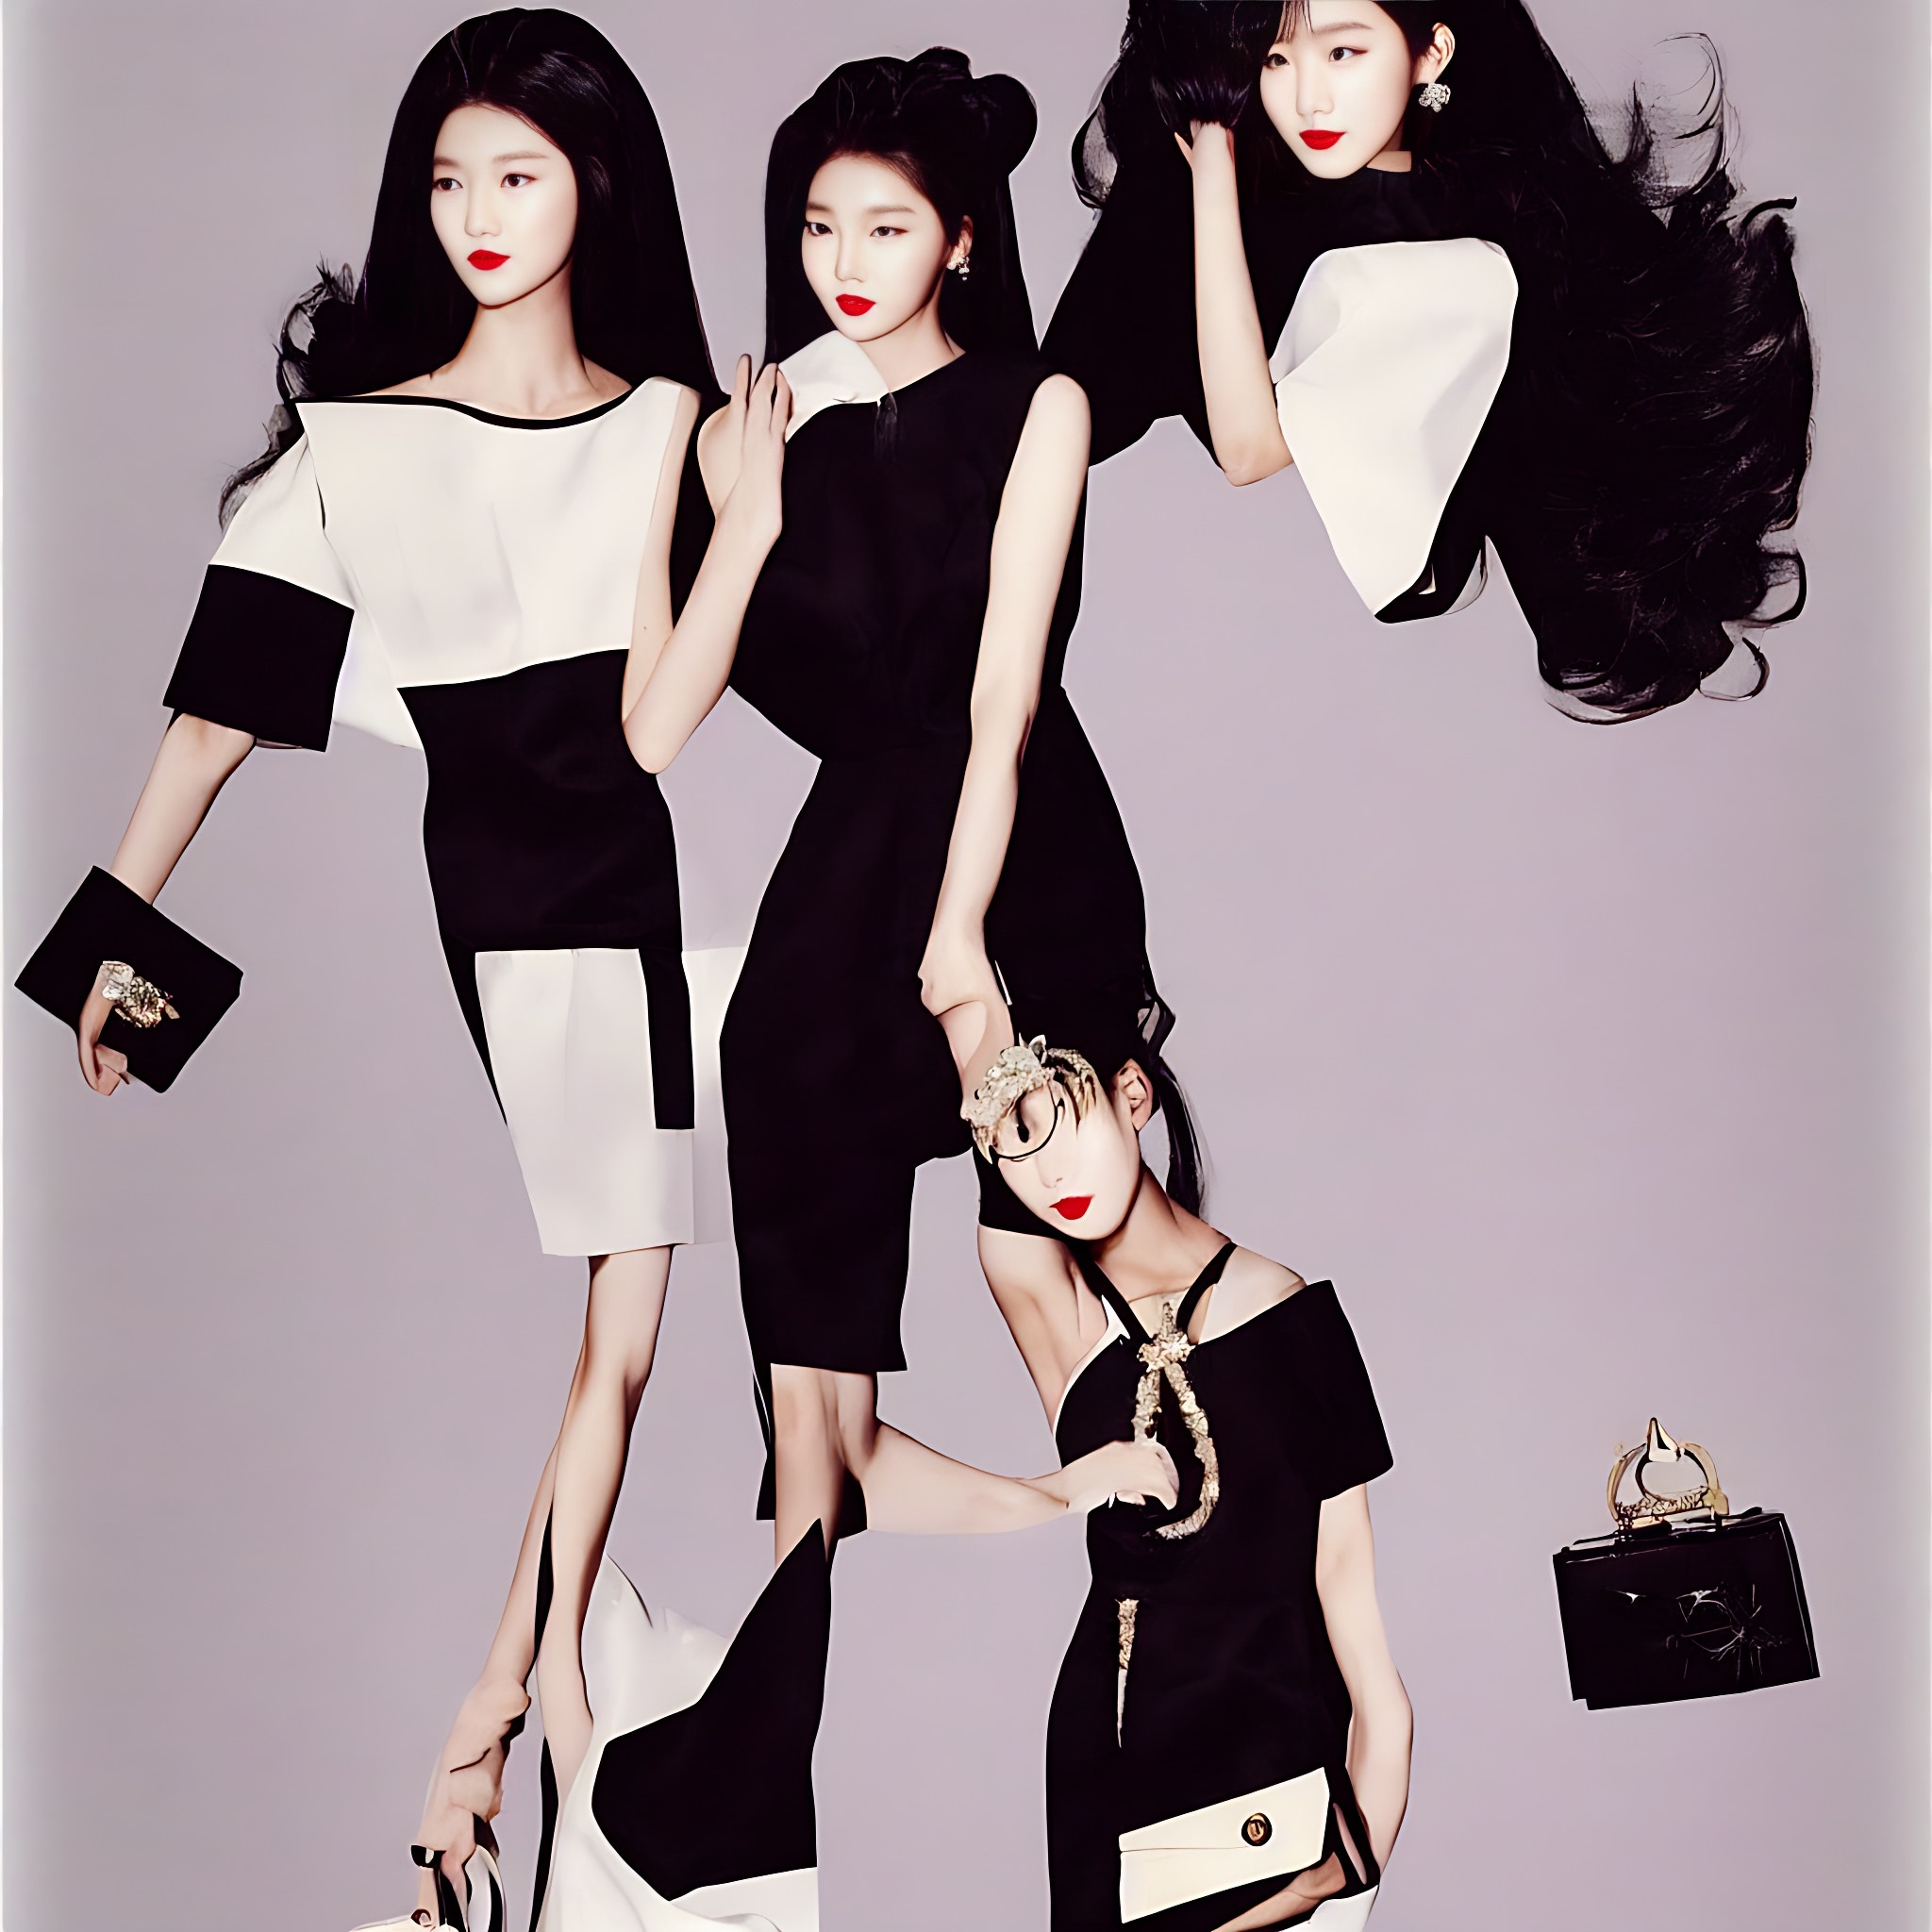 fashion-advertisement-for-korea-in-the-1990s-2